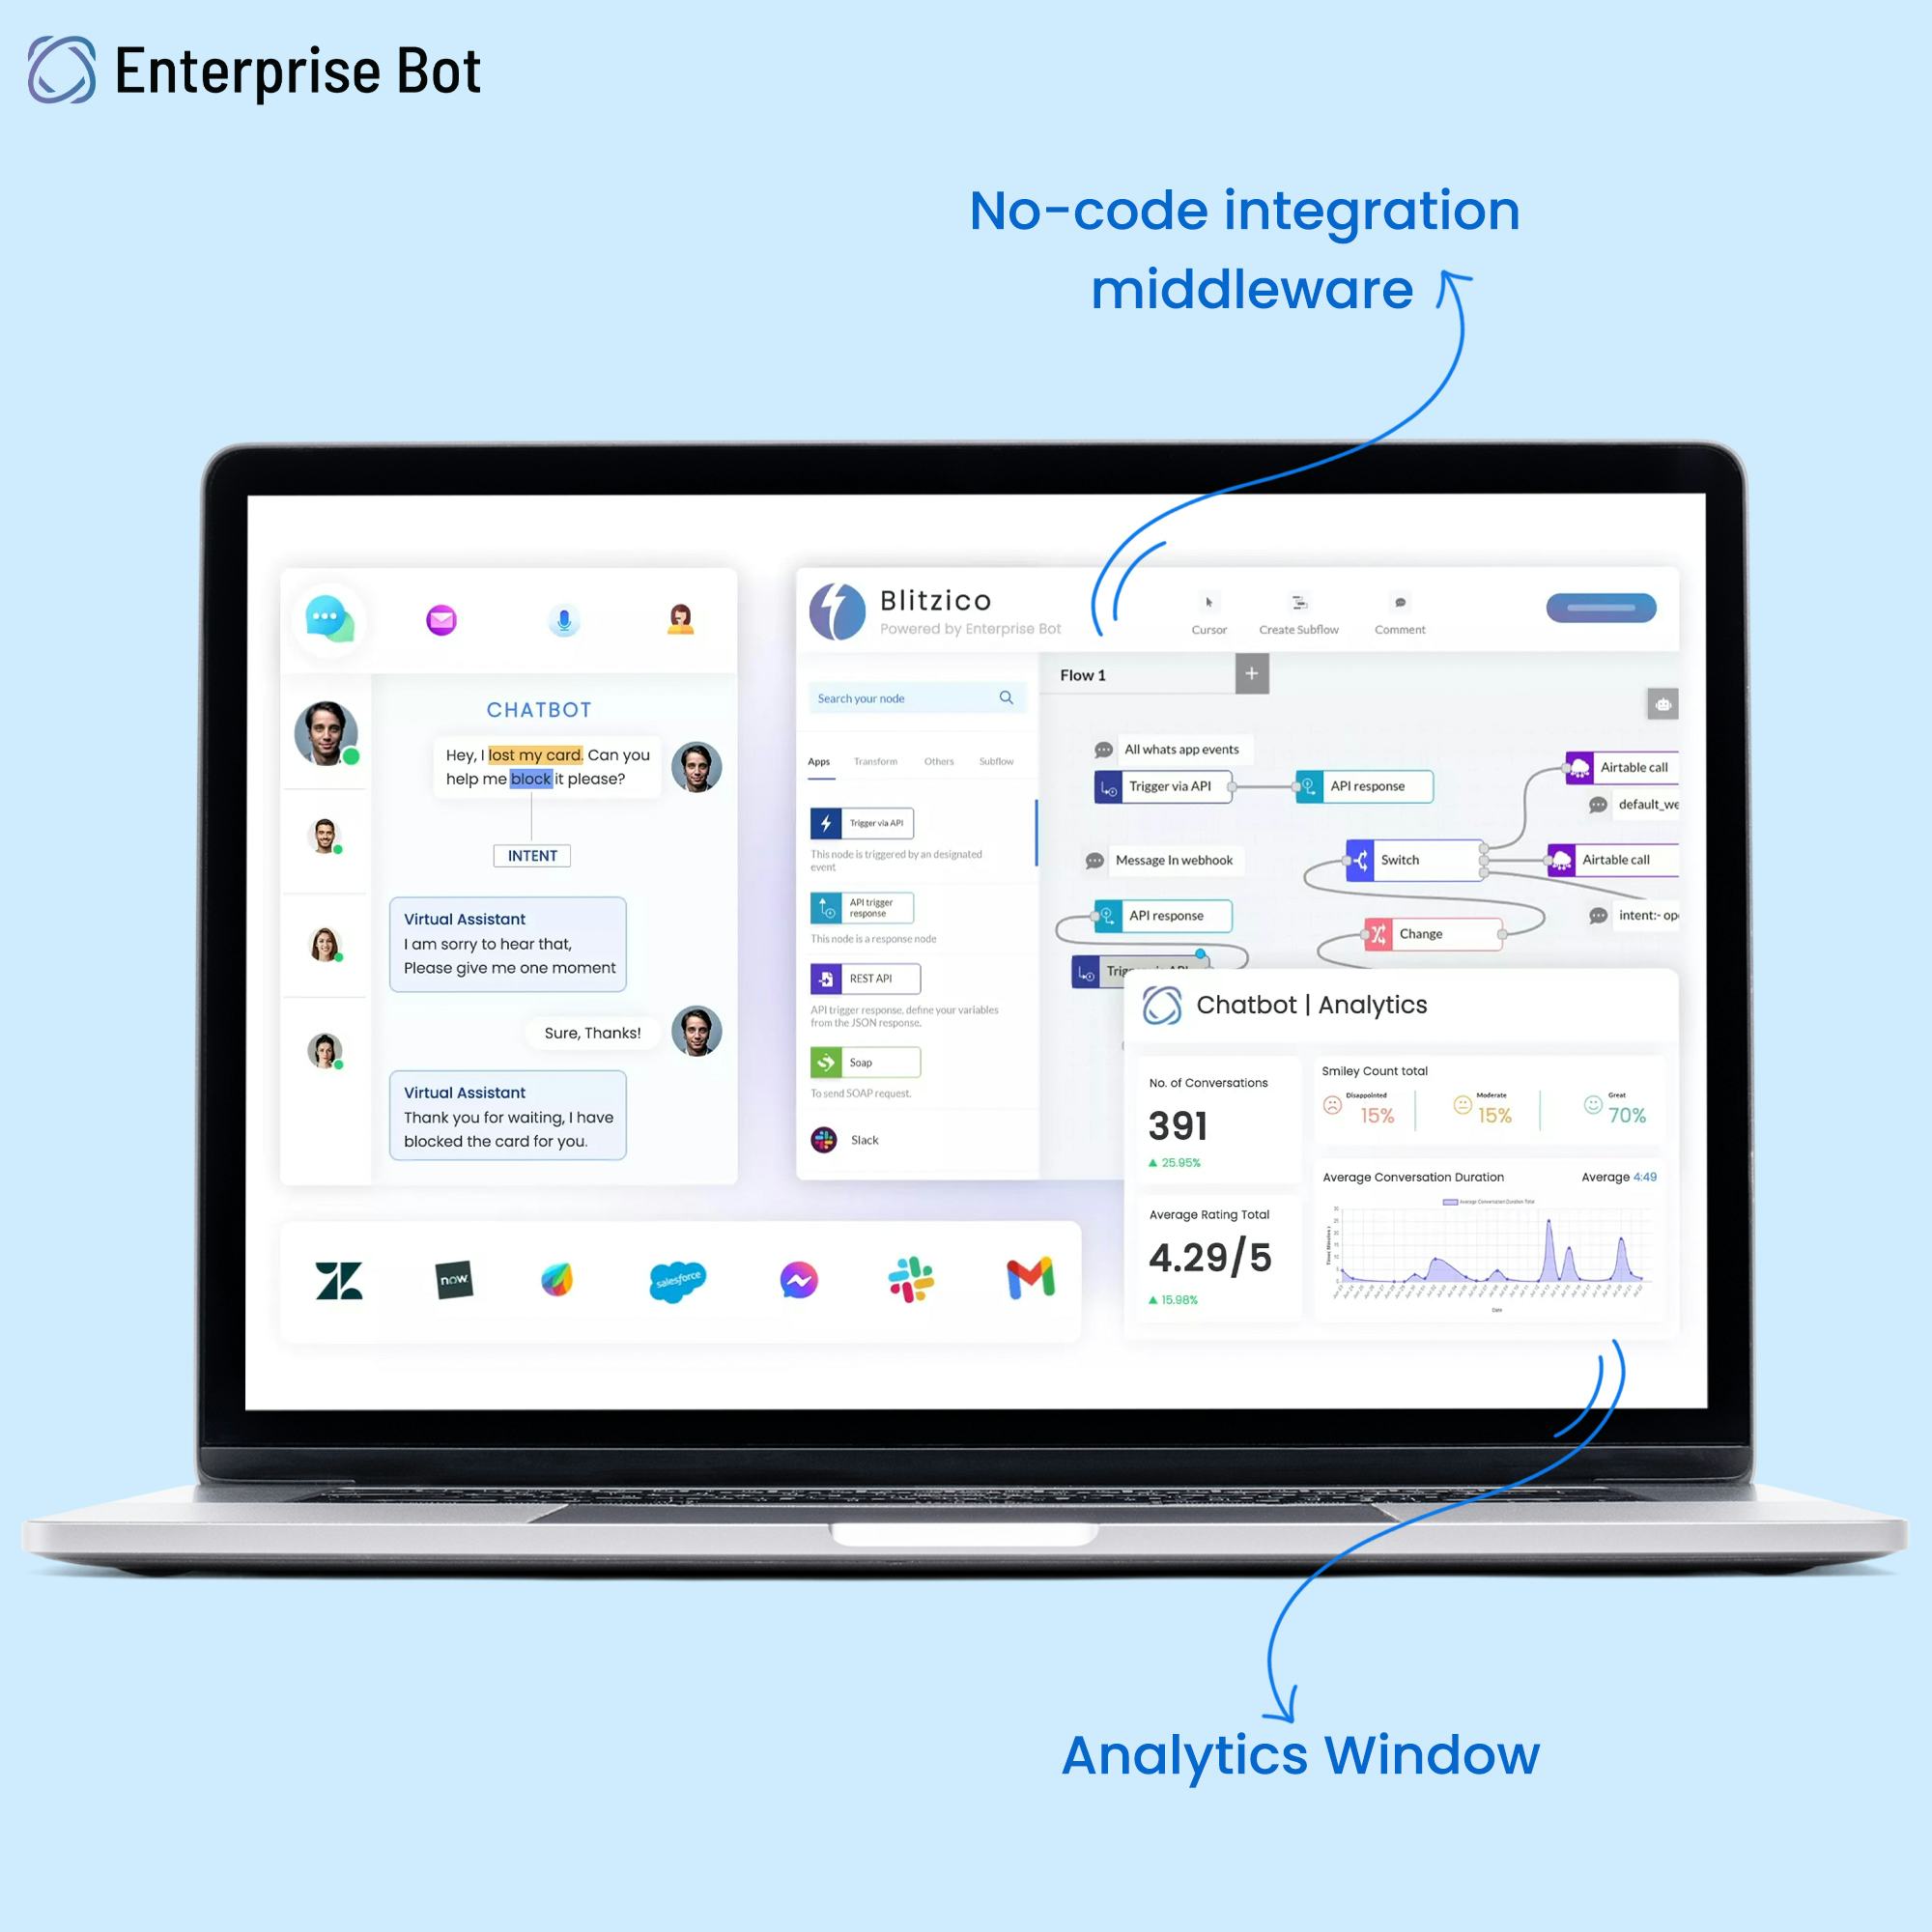 Enterprise Bot Software - Improve continuously with advanced analytics. Integrate your backend systems using the no-co integration middleware